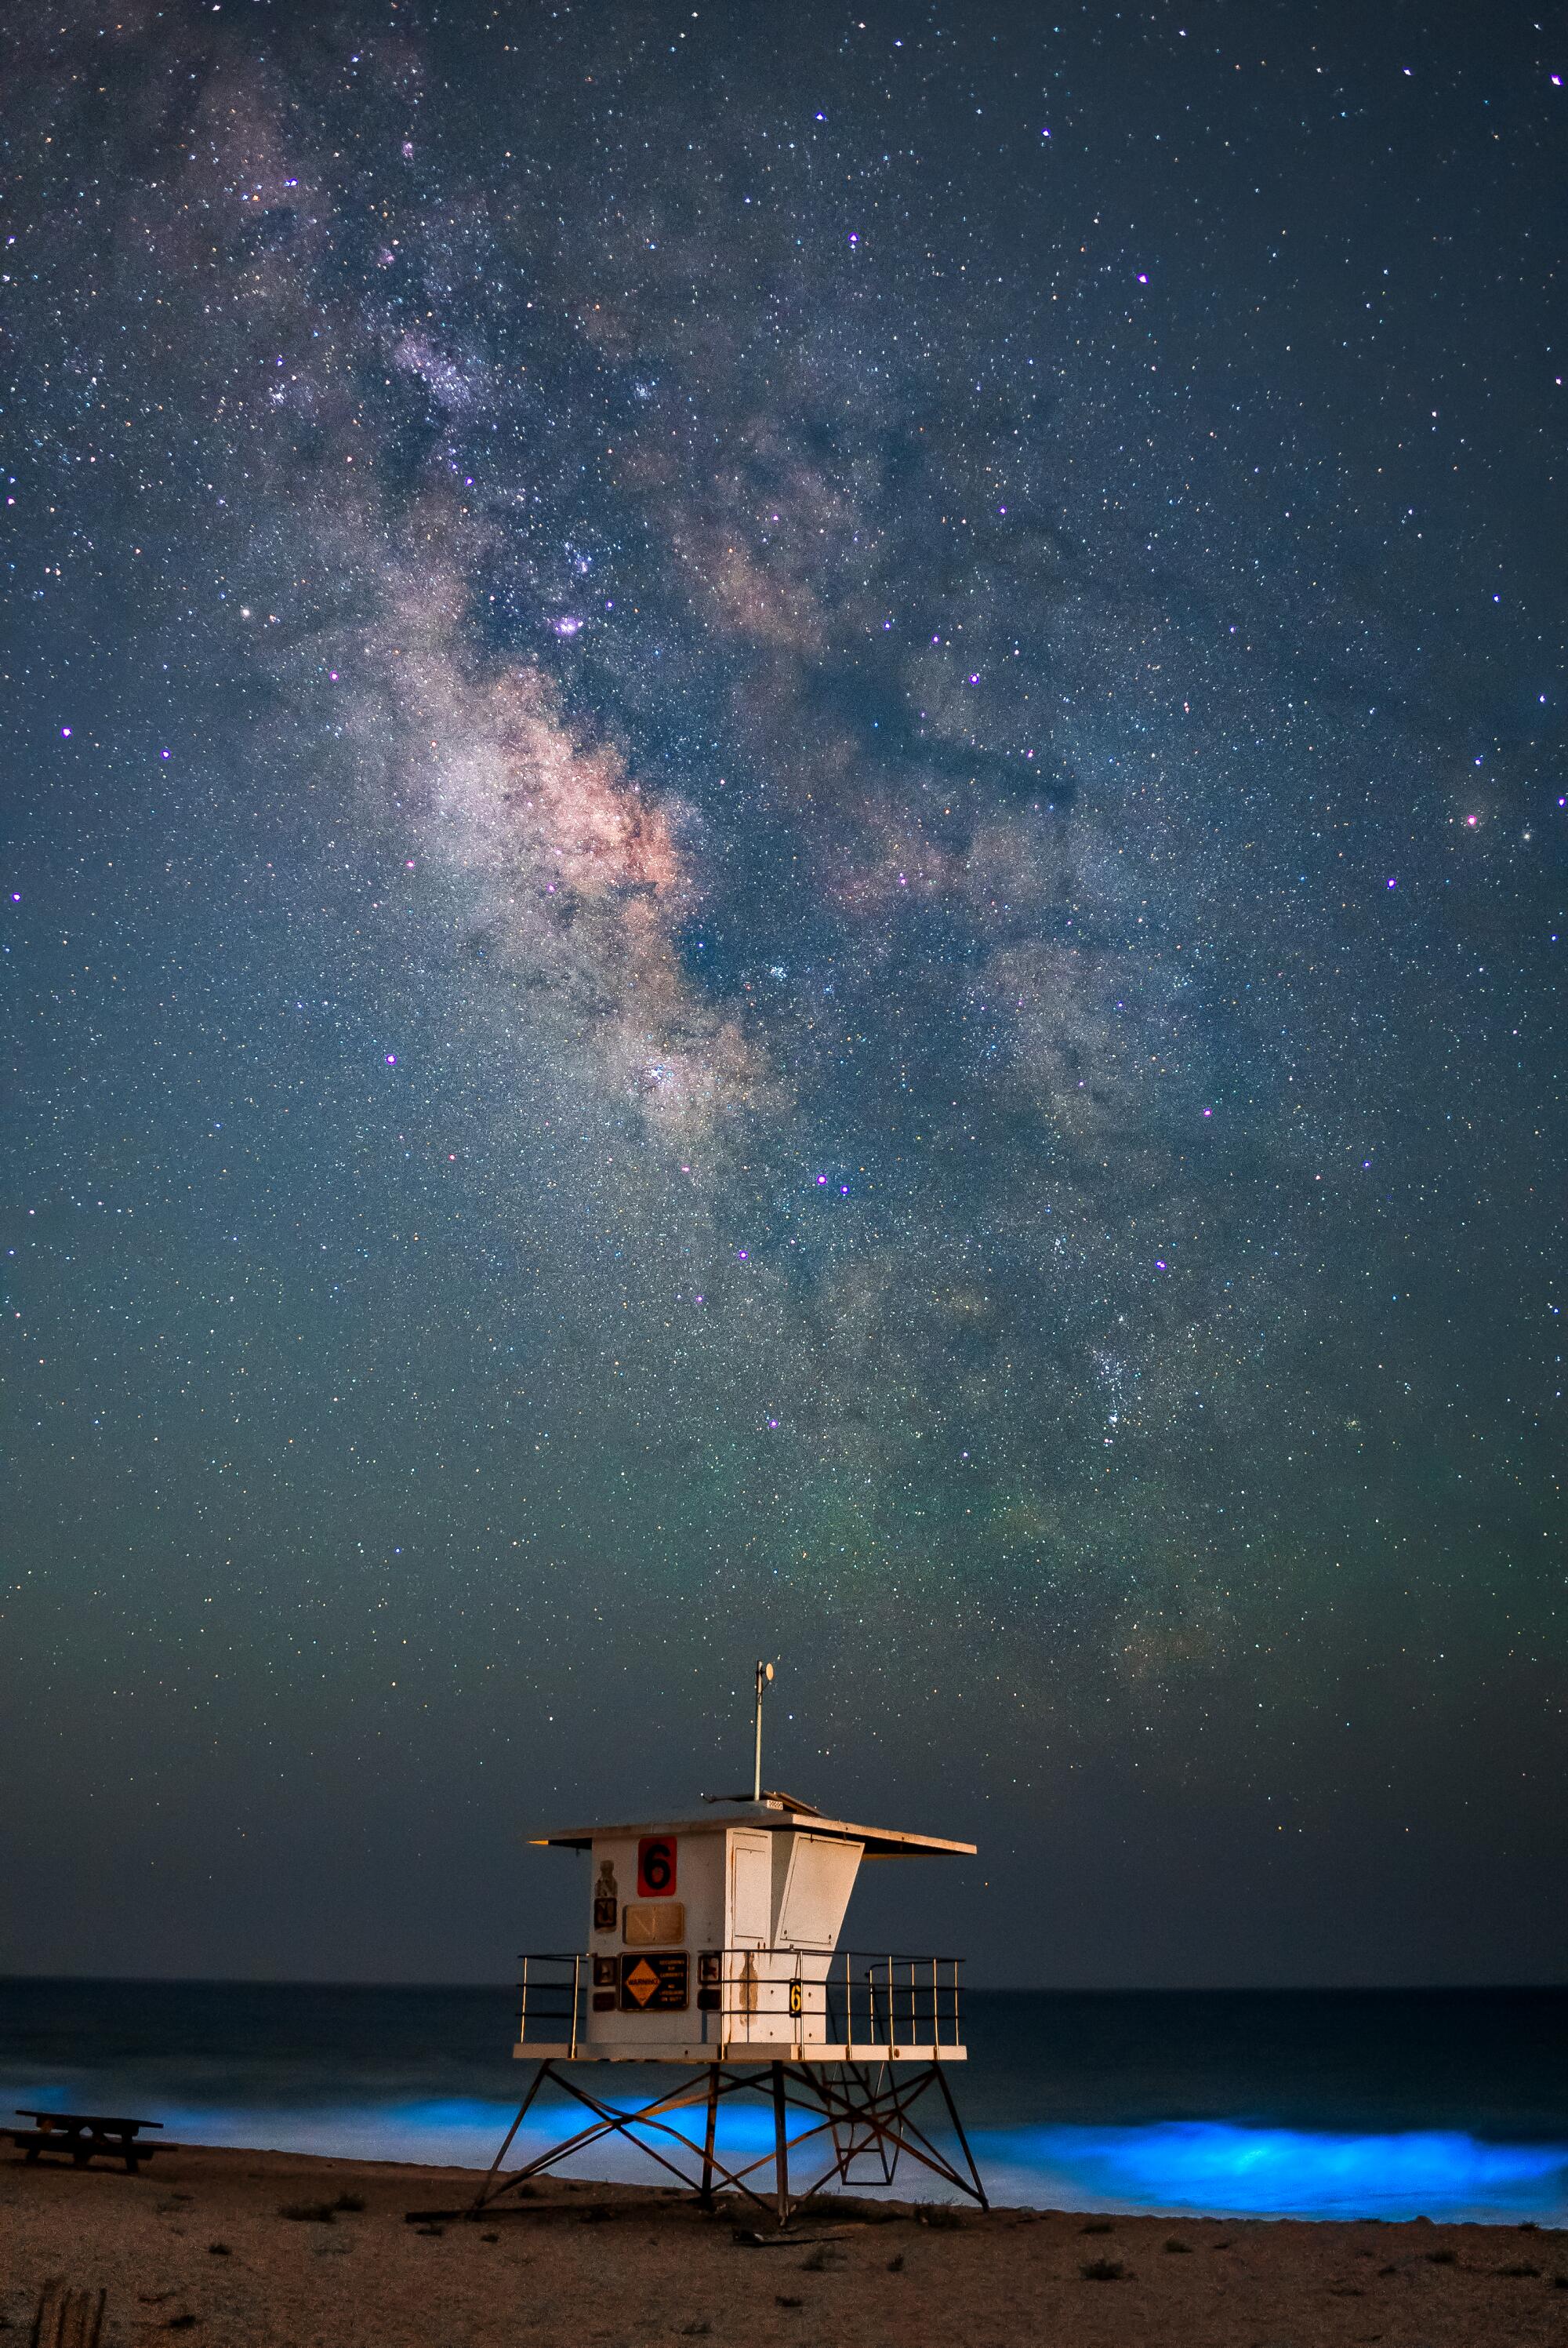 The ocean glows under the Milky Way while a lifeguard station sits on the beach nearby.